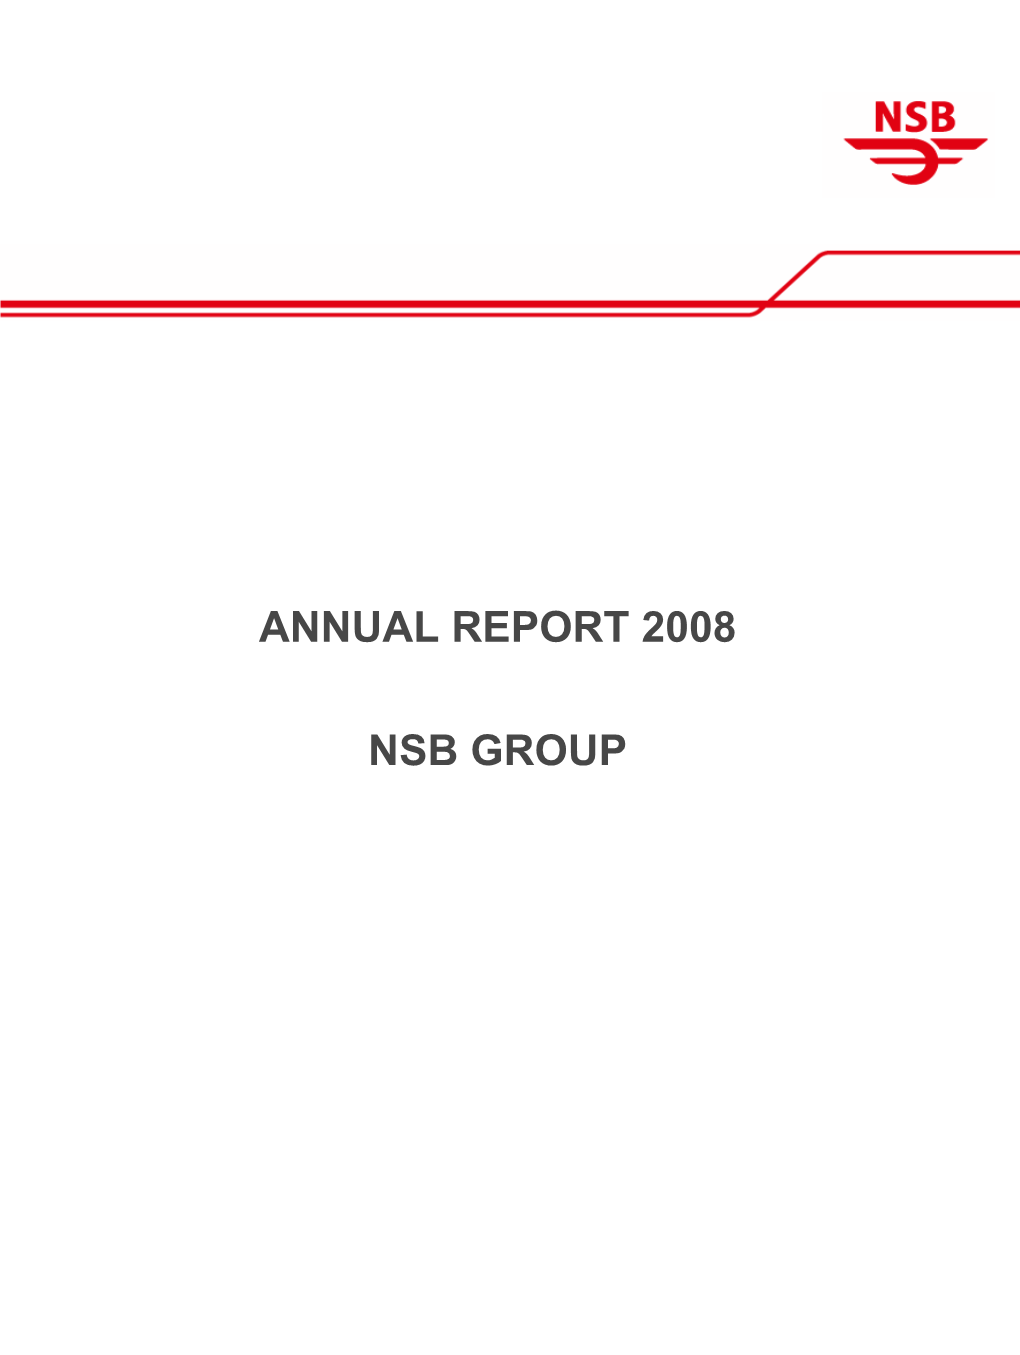 Annual Report 2008 Nsb Group